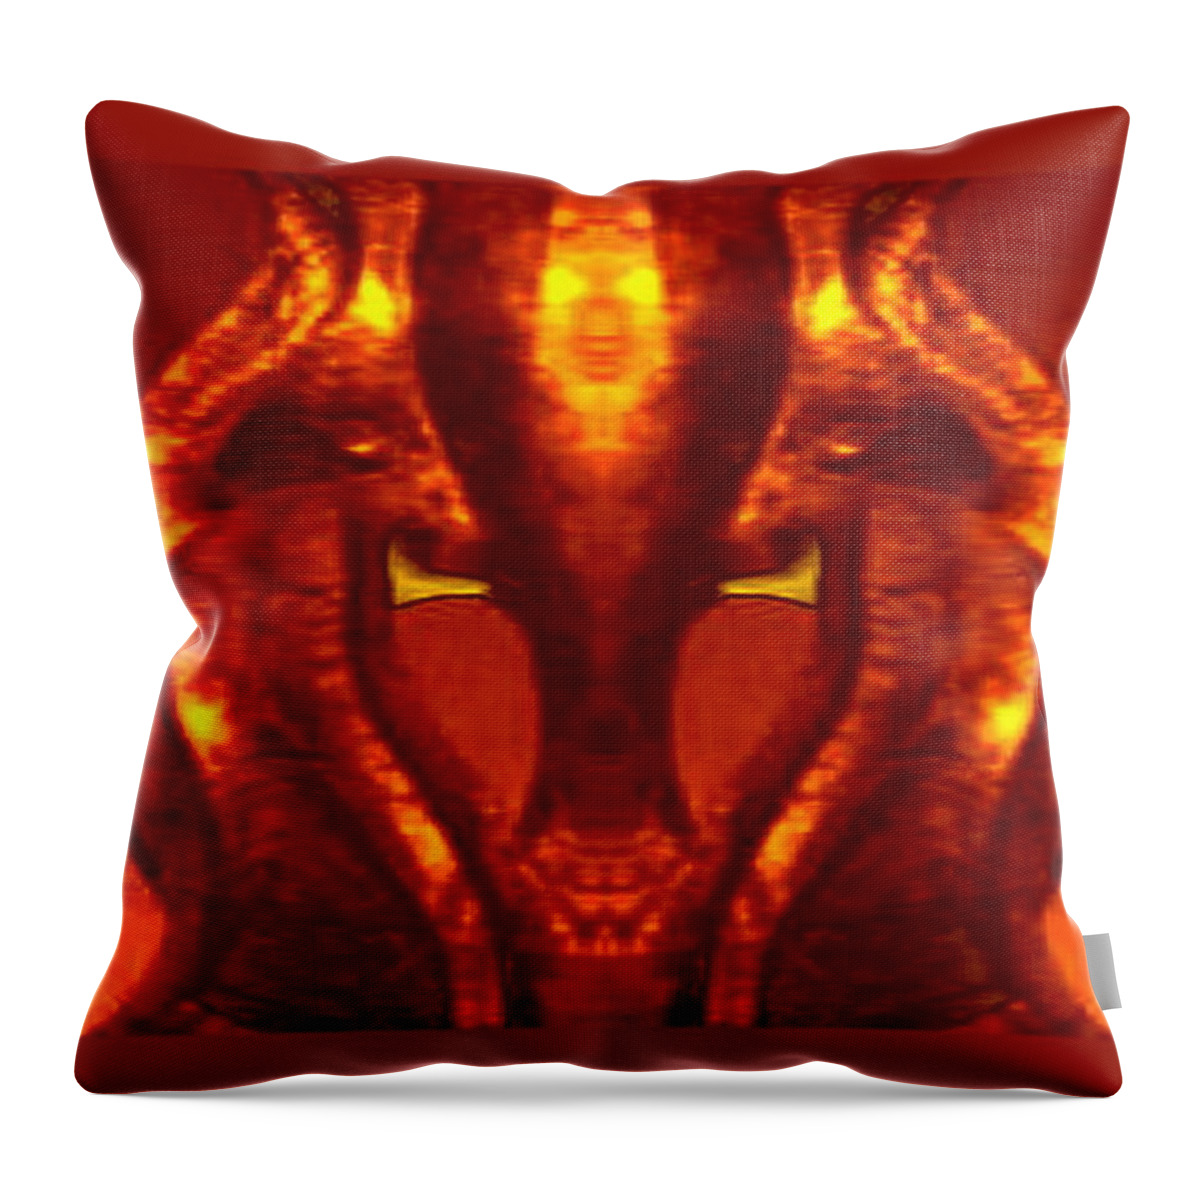  Throw Pillow featuring the ceramic art Jack O by Mary Russell